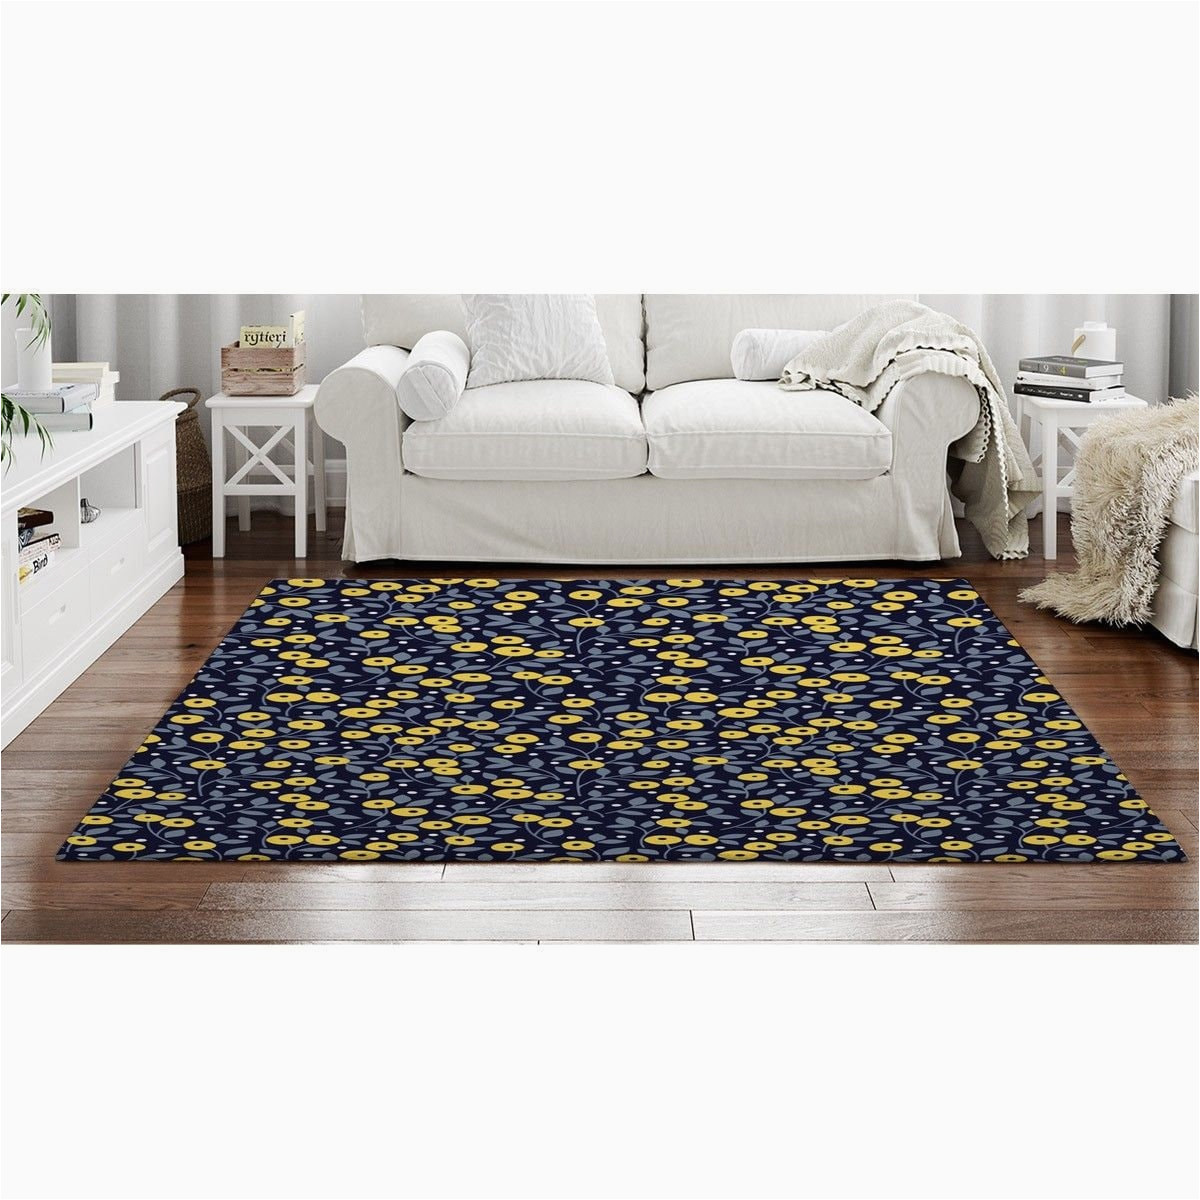 Blue Grey and Yellow Rug Blue and Yellow Rugs Floral area Rug Blue and Yellow Ditsy – Etsy.de